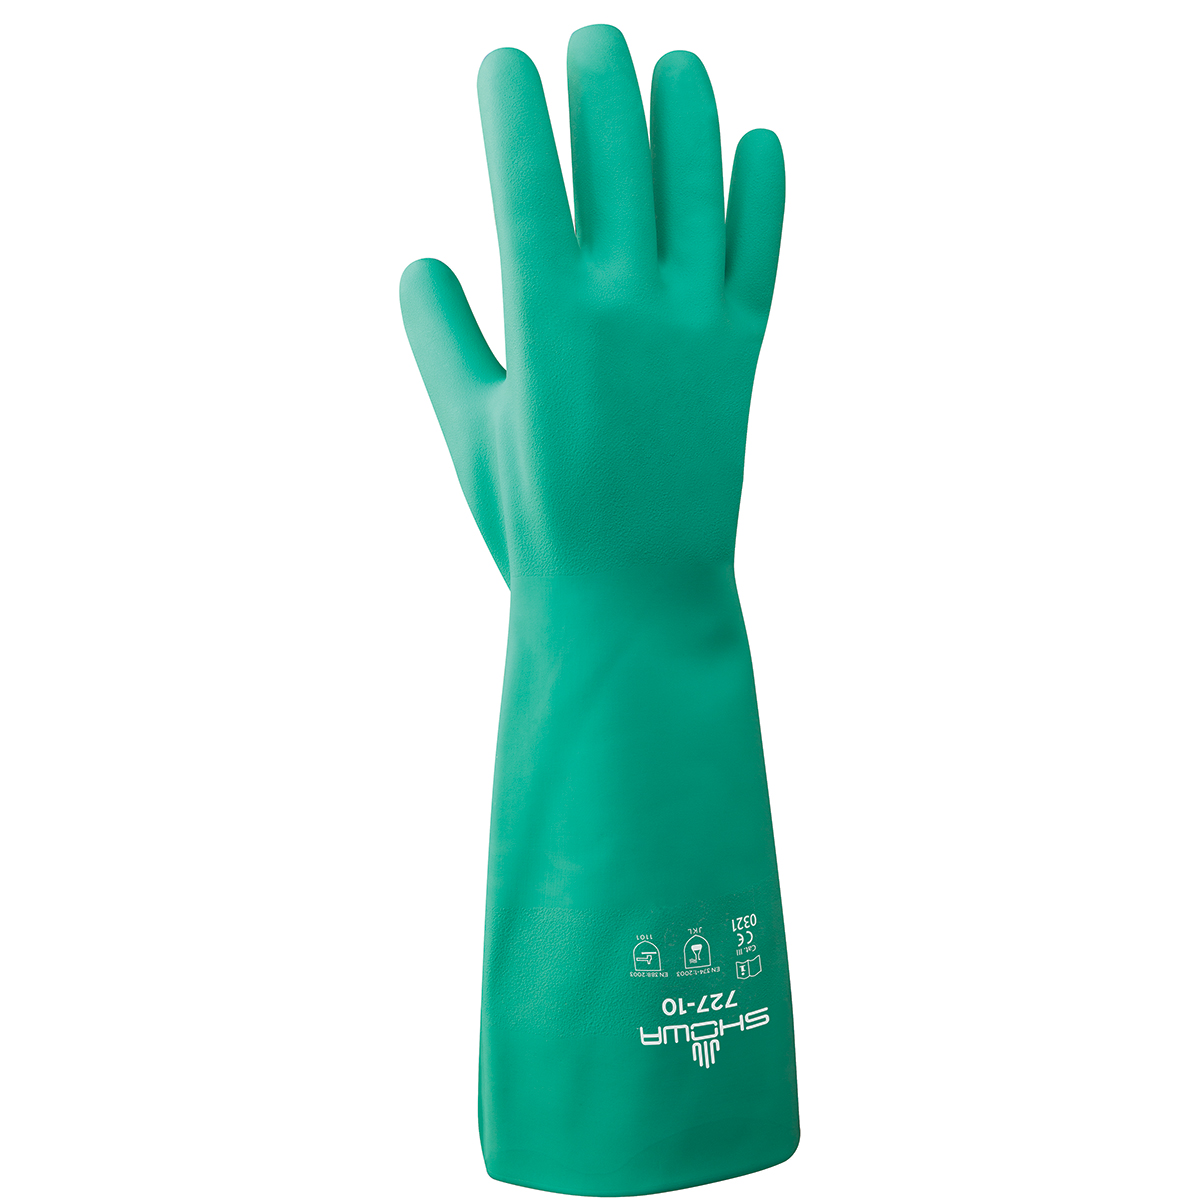 Chemical resistant unsupported nitrile, 13", 15-mil, light green, bisque finish, unlined lined, extra small